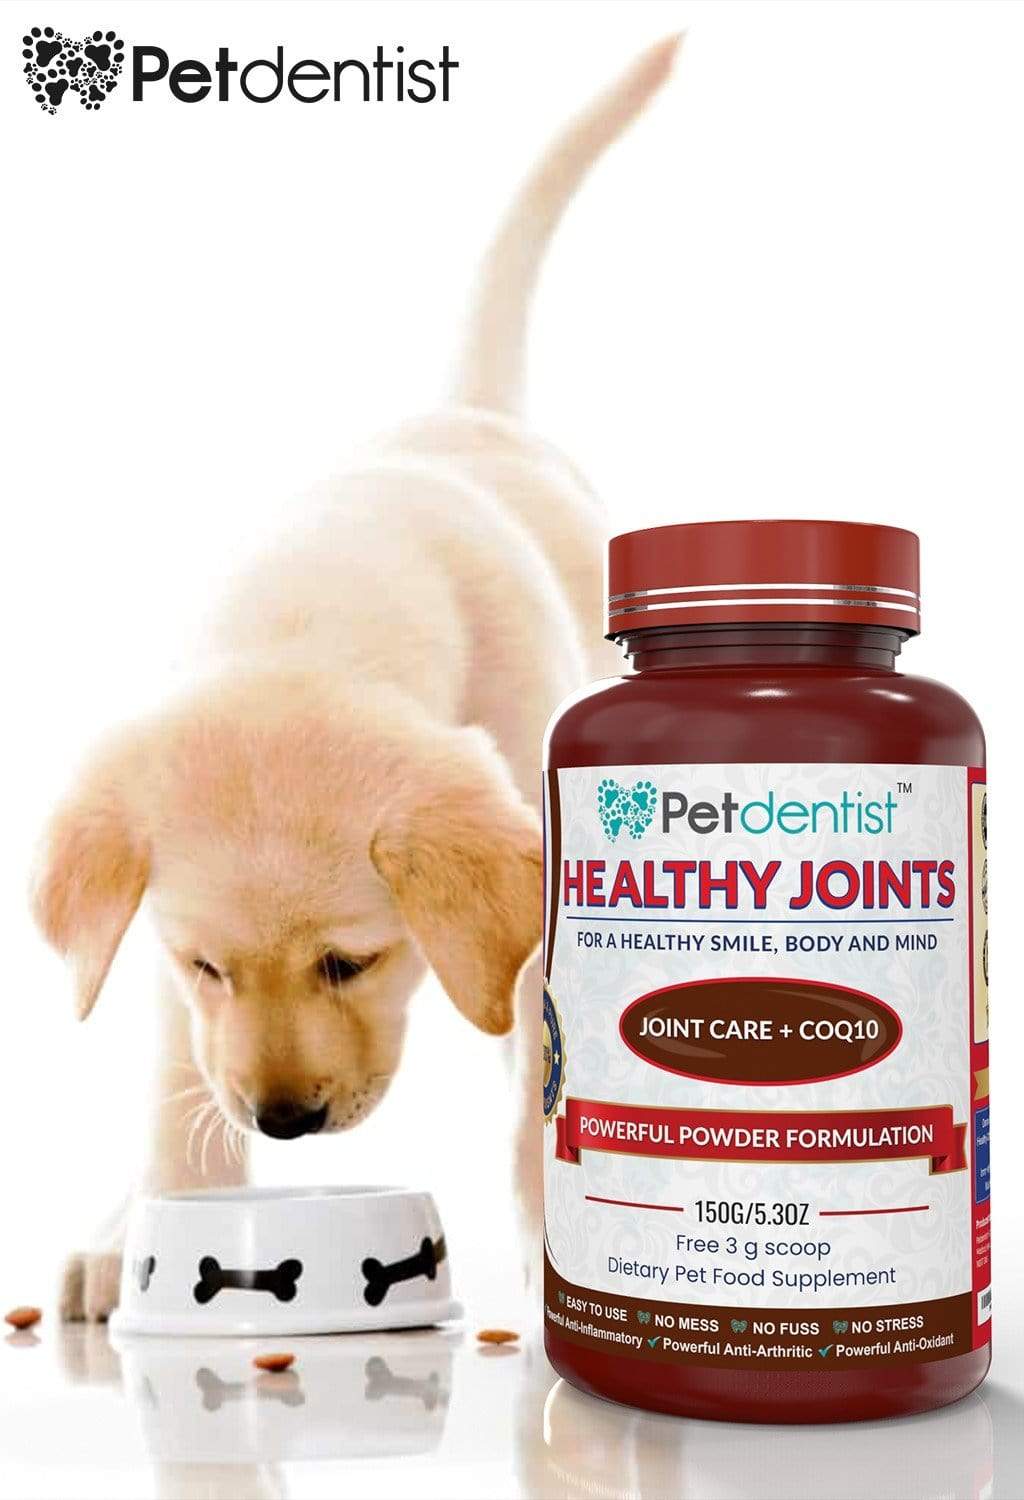 hip and joint powder for dogs